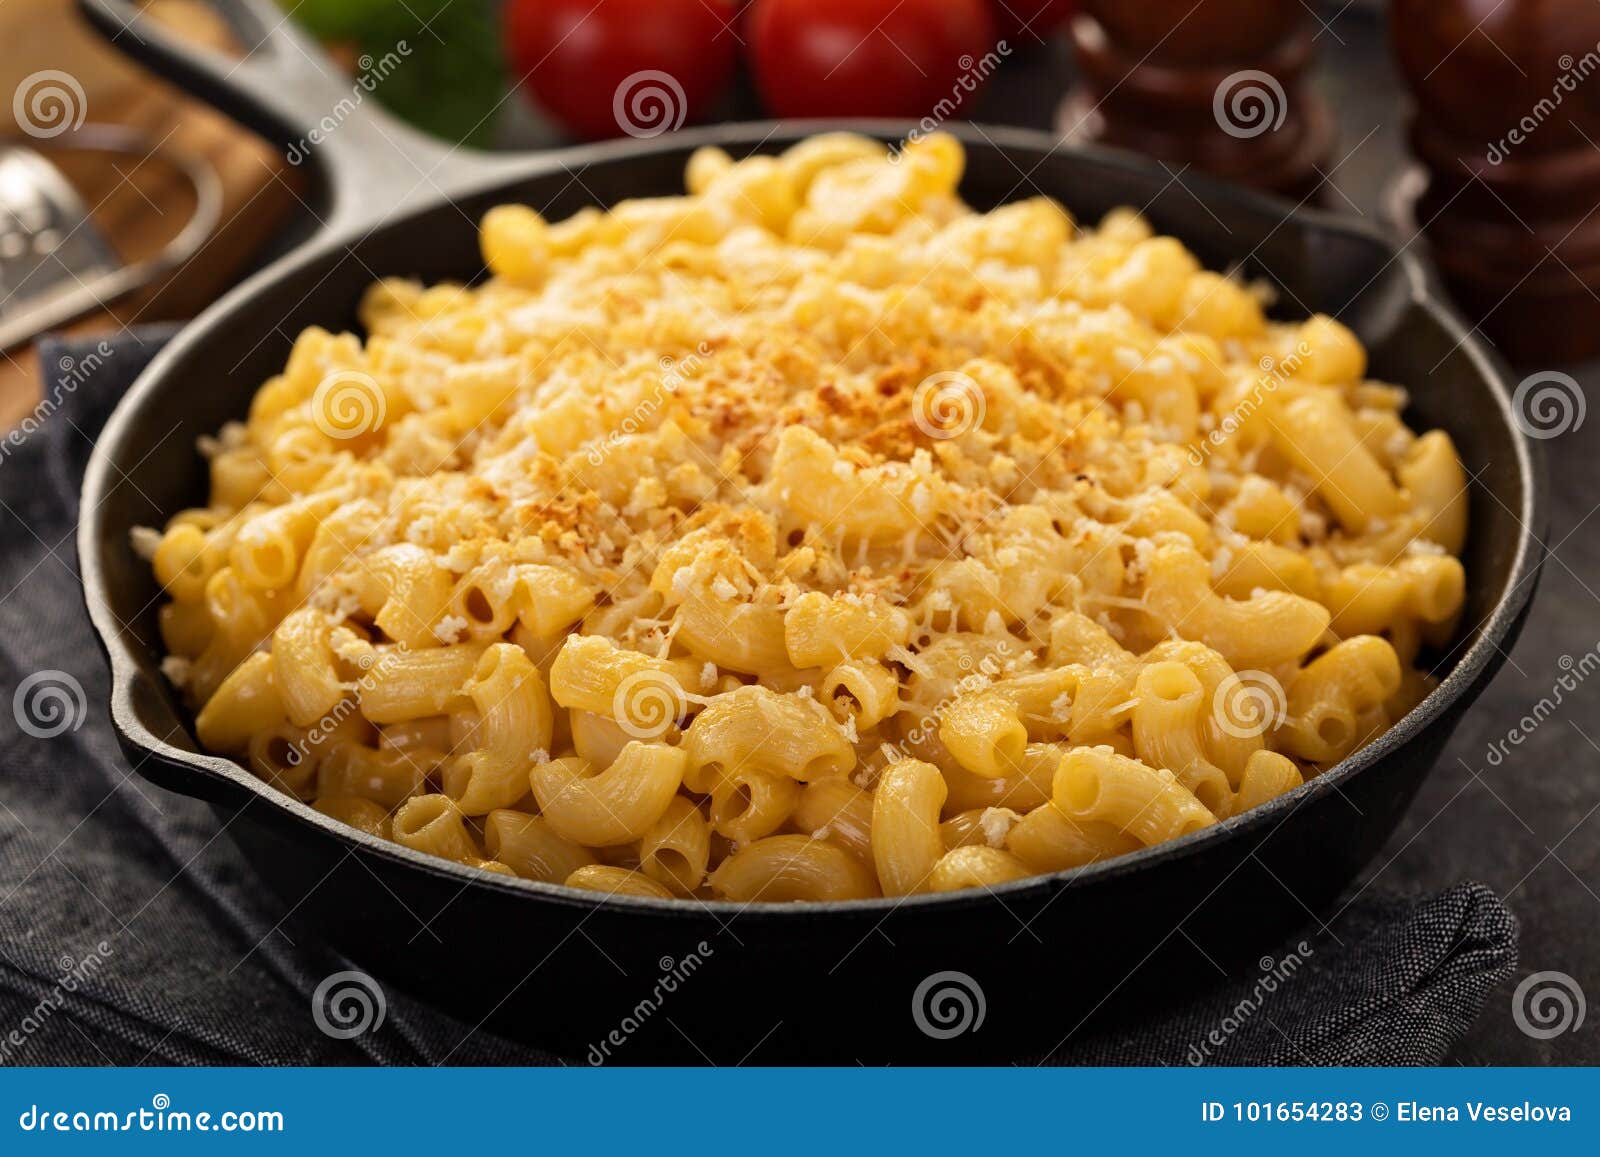 mac and cheese in a cast iron pan